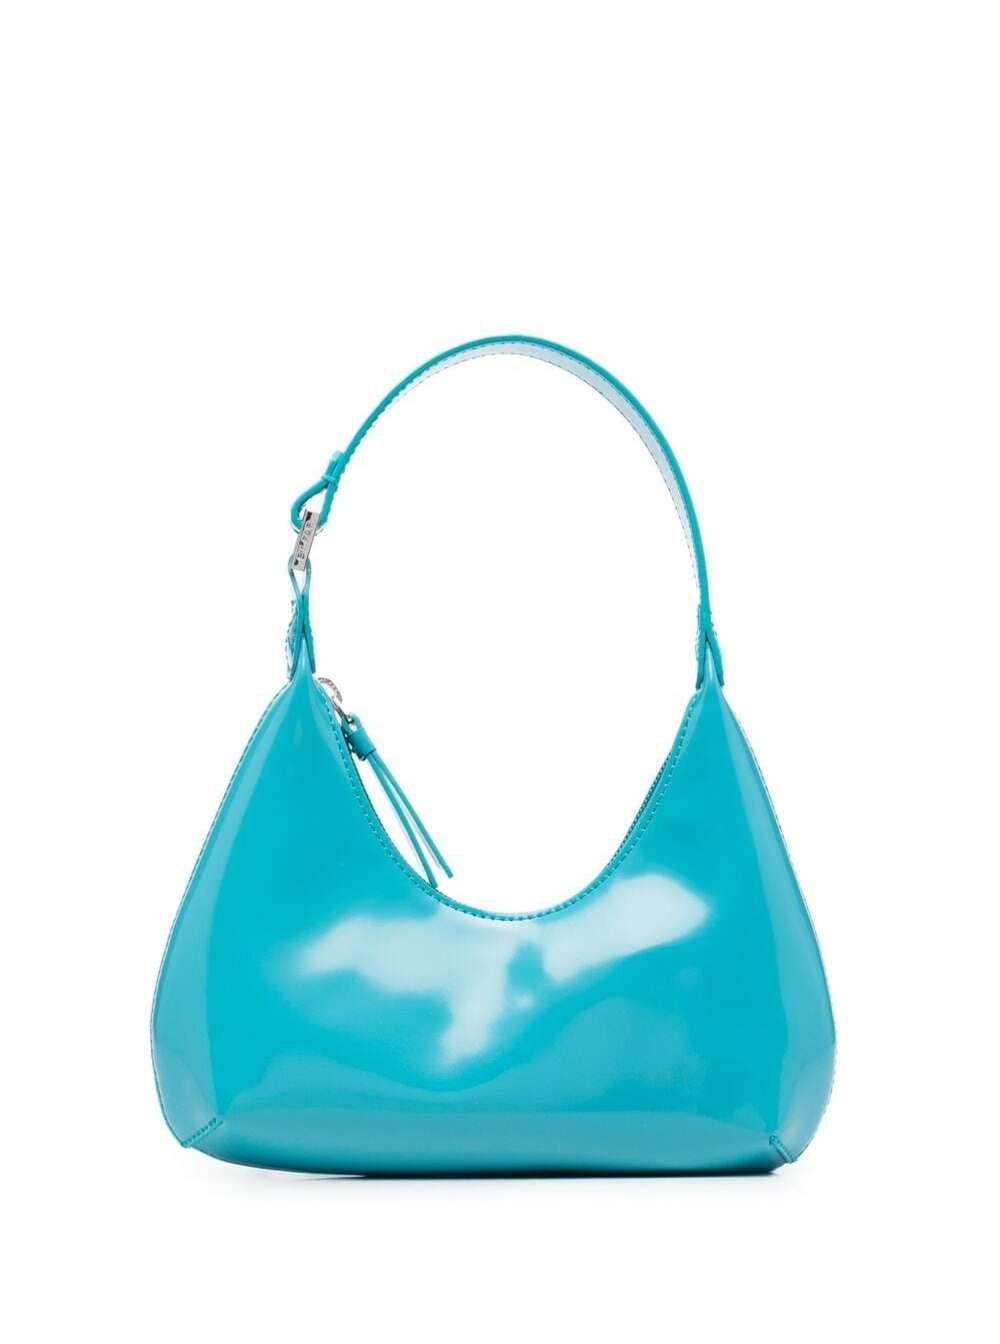 BY FAR Amber Light Blue Handbag In Patent Leather With Adjustable Handle And Zip Closure Woman